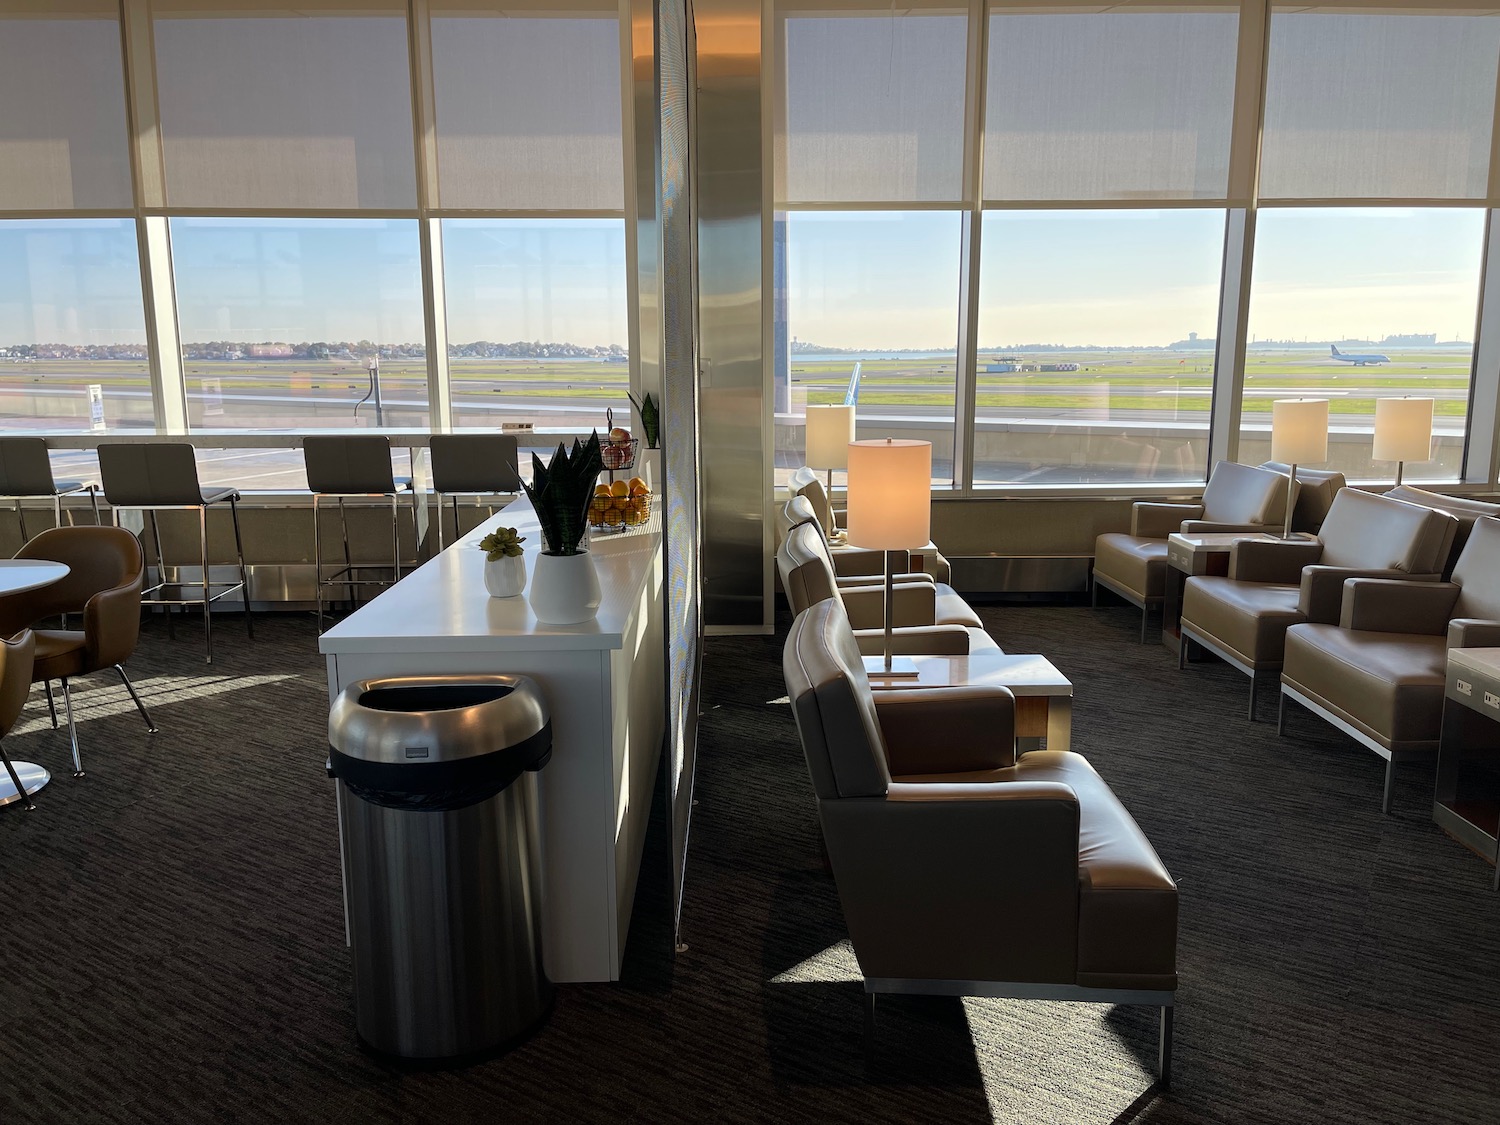 Review: United Club Boston (BOS) - Live and Let's Fly